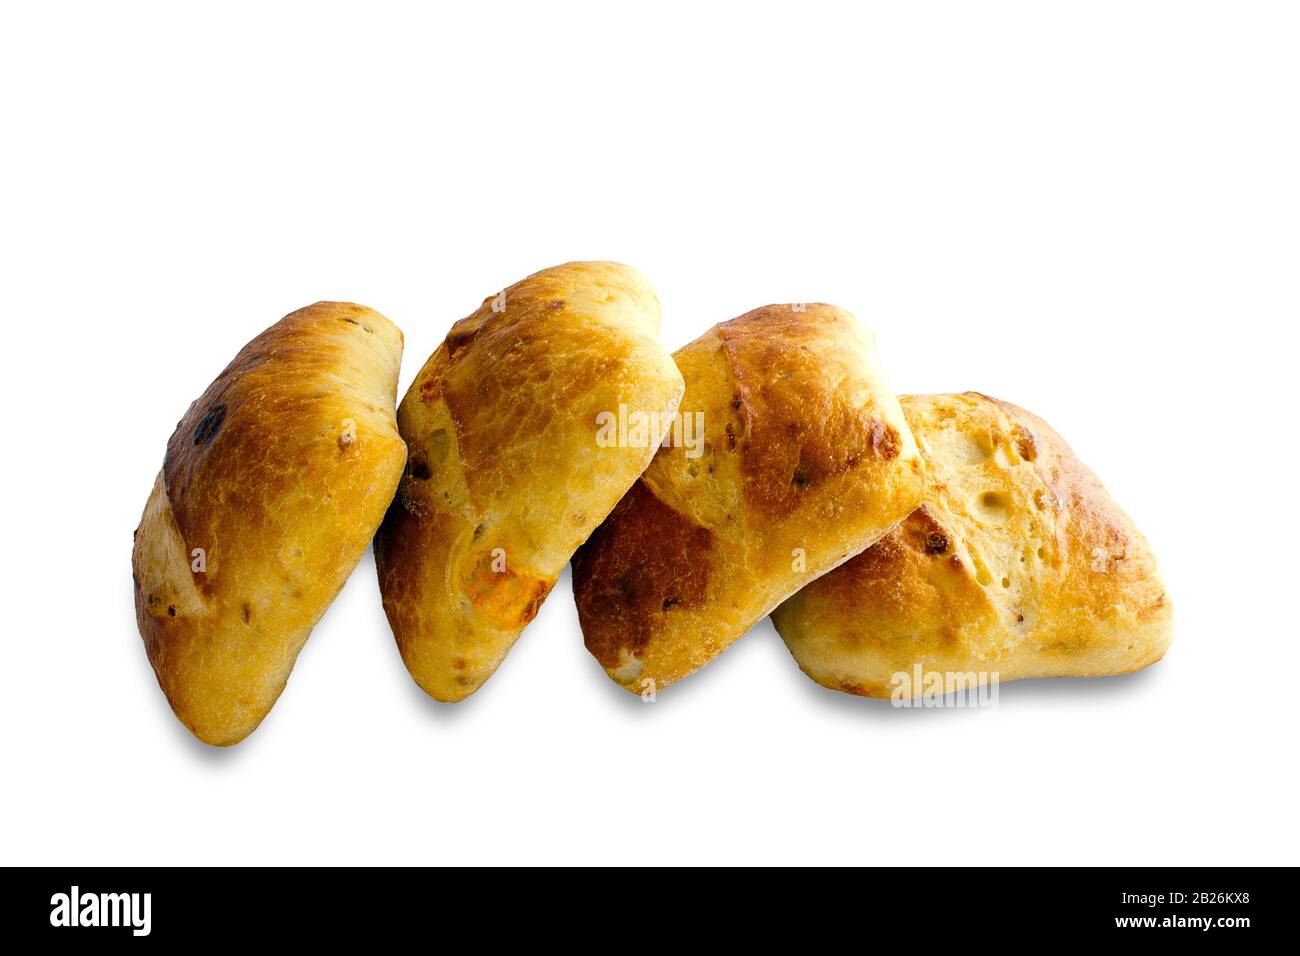 Four cheese bread rolls on an isolated white background Stock Photo